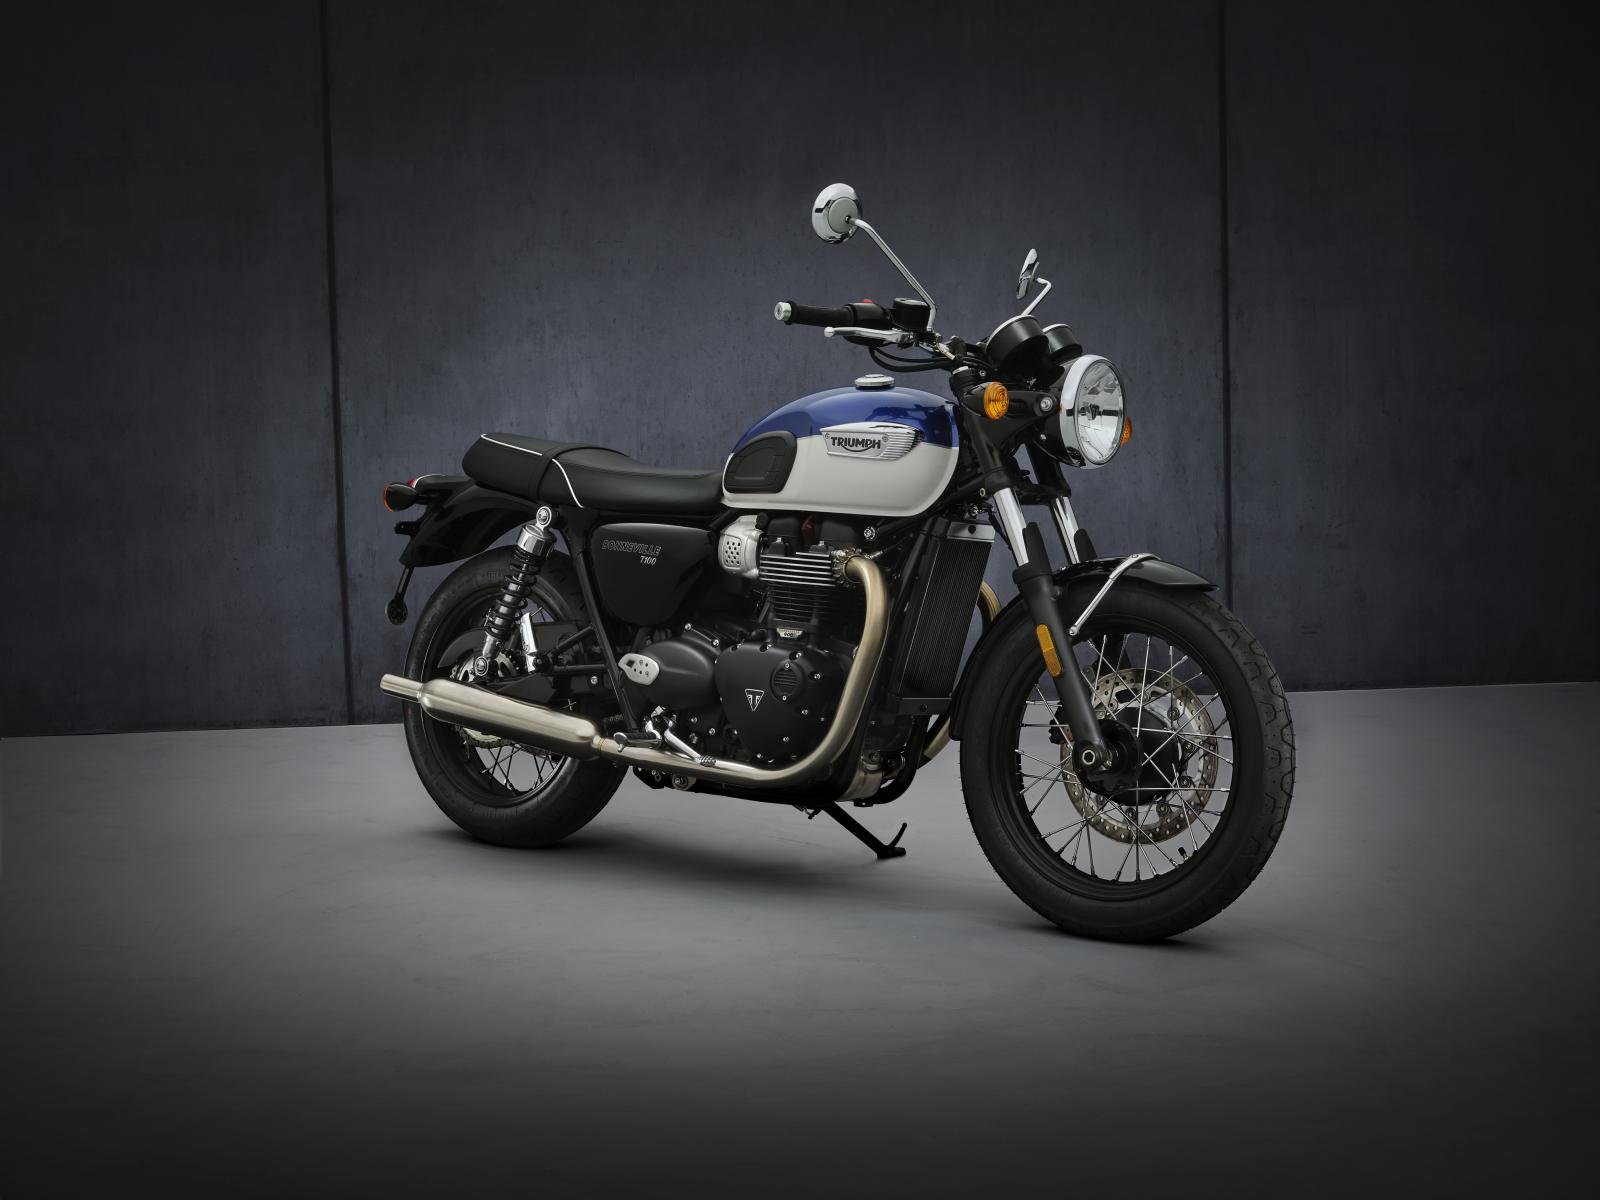 2021 Triumph Bonneville T100 Launched in India - Lighter & More Powerful